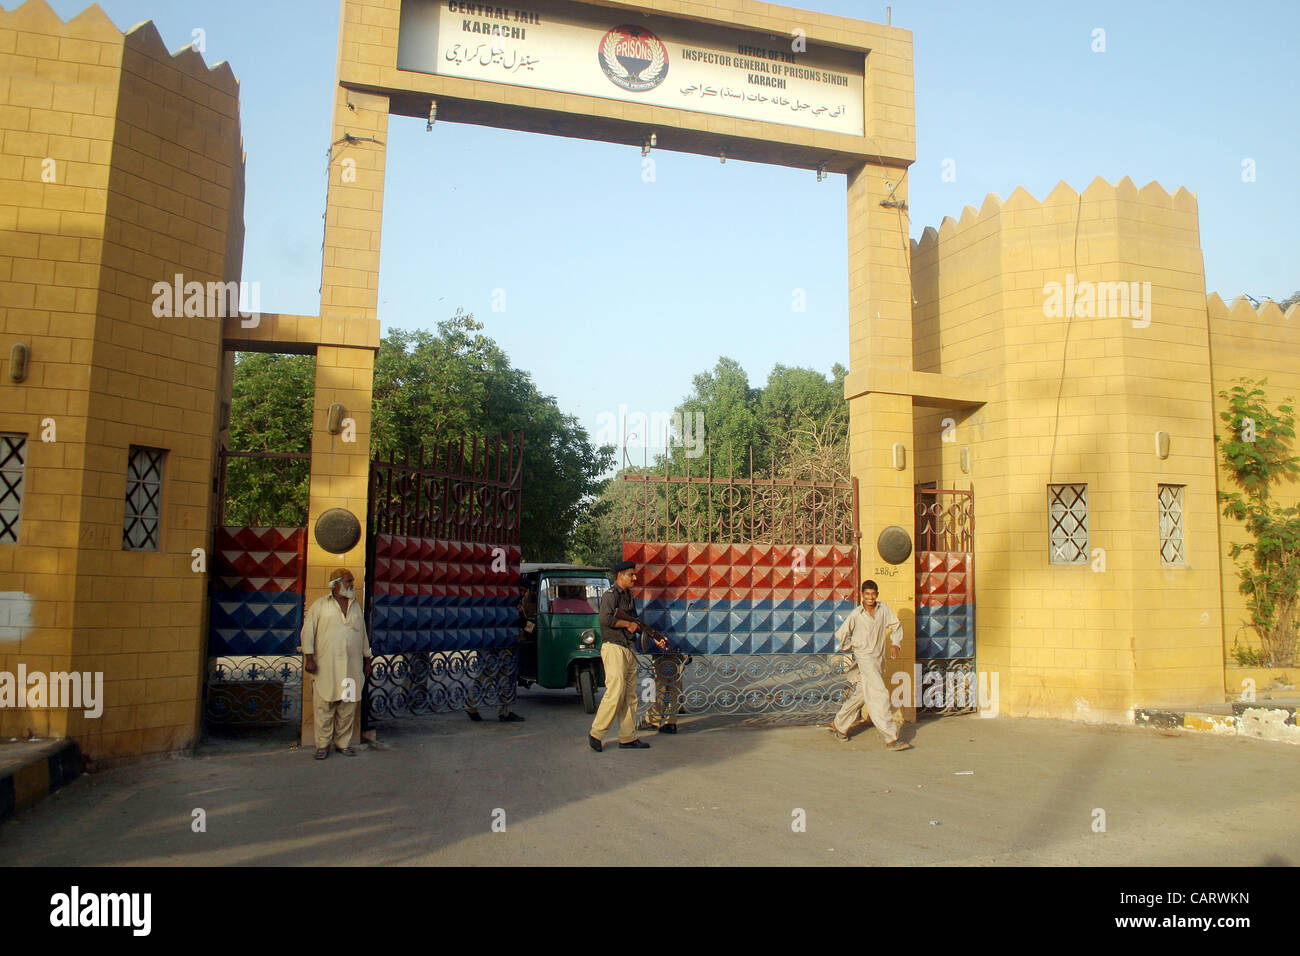 A policeman stands guard at central prison as four prisons in Sindh province including Karachi Central prison, Landhi prison, Hyderabad prison and Sukkur prison are declared sensitive on Monday after militants attack at Bannu prison, in Karachi on Monday, April 16, 2012. Stock Photo